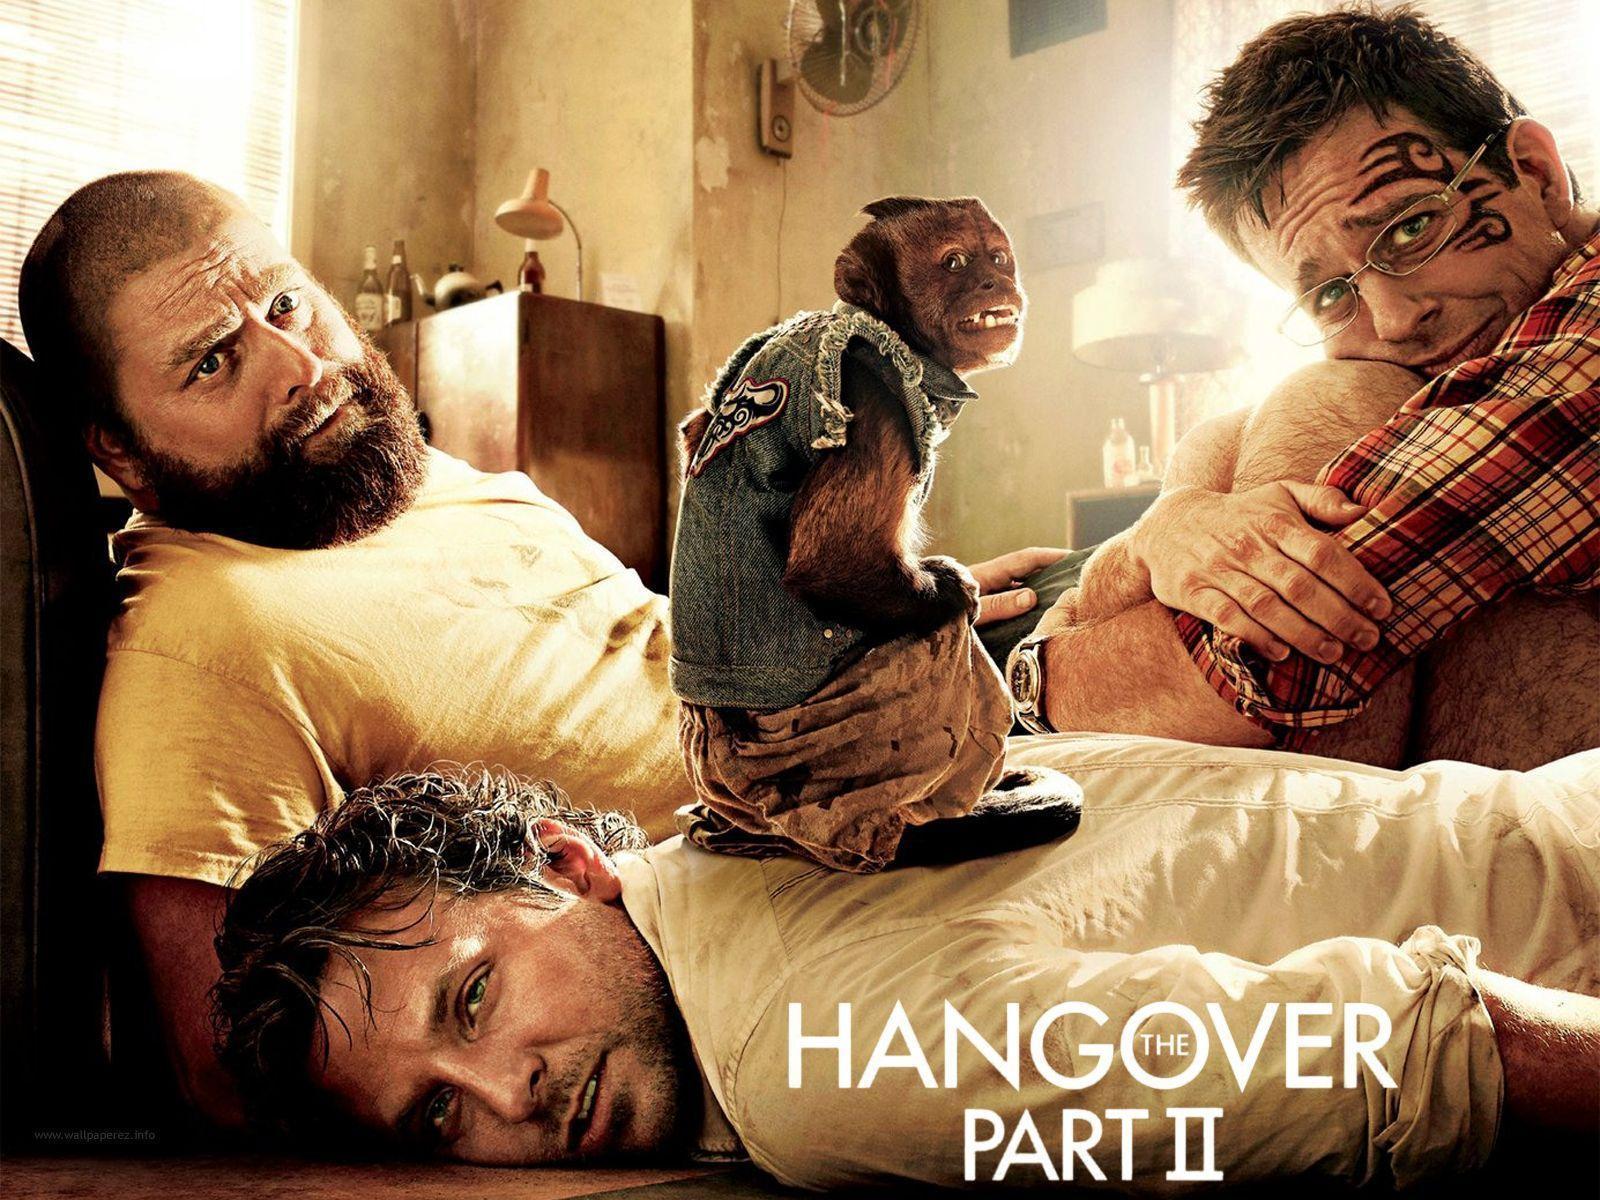 Wallpaper Tagged With HANGOVER. HANGOVER HD Wallpaper